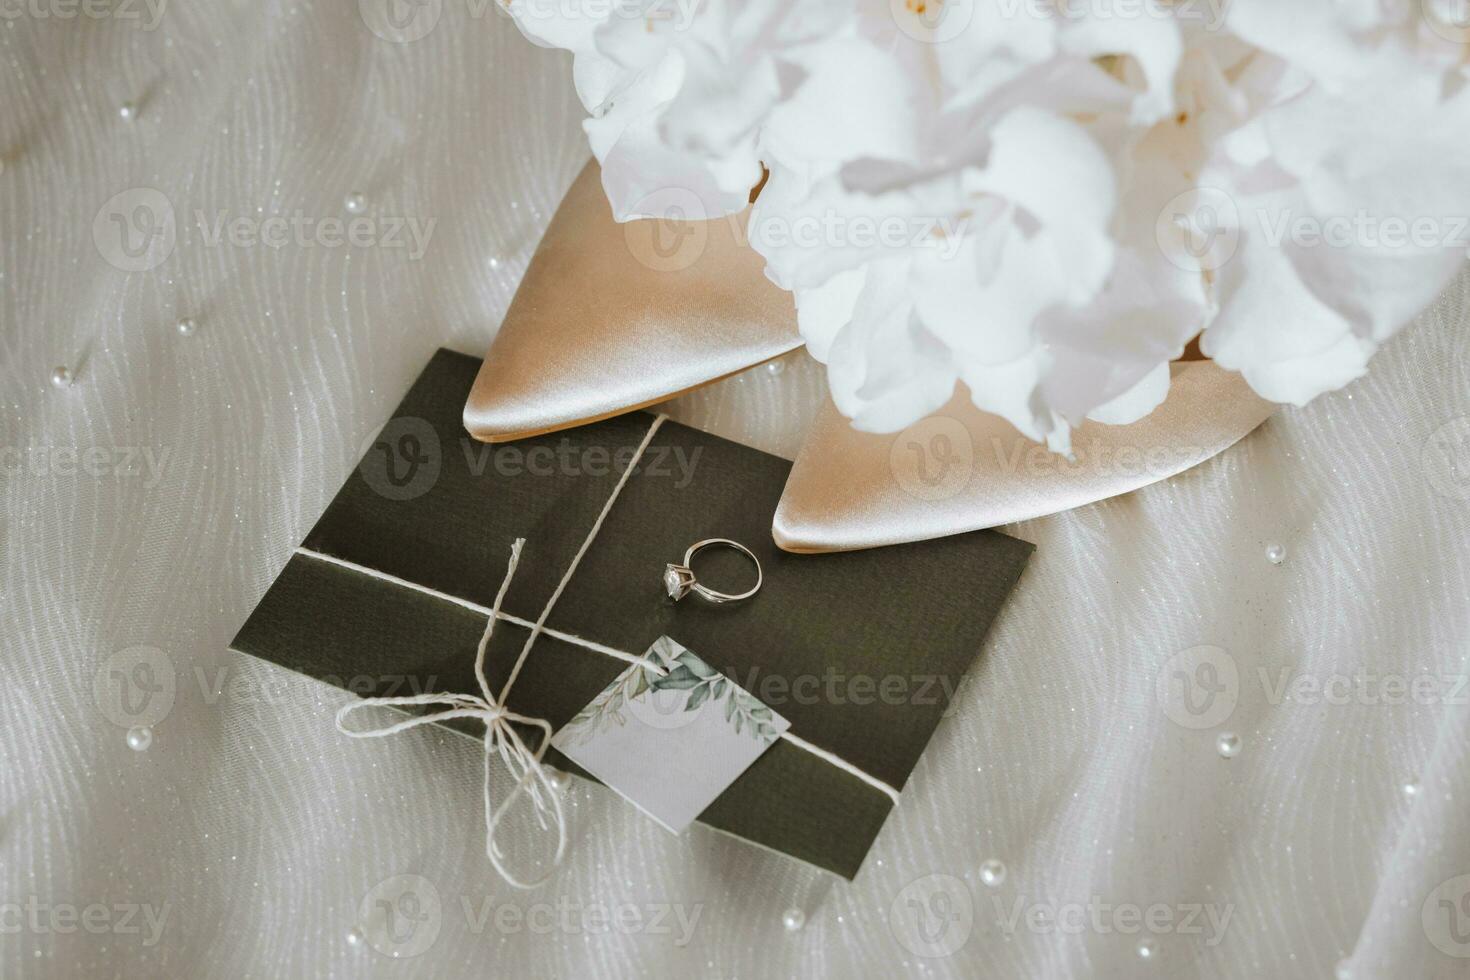 wedding accessories in light colors, shoes, a wedding ring and a wedding bouquet. Invitation from embossed paper in green color photo